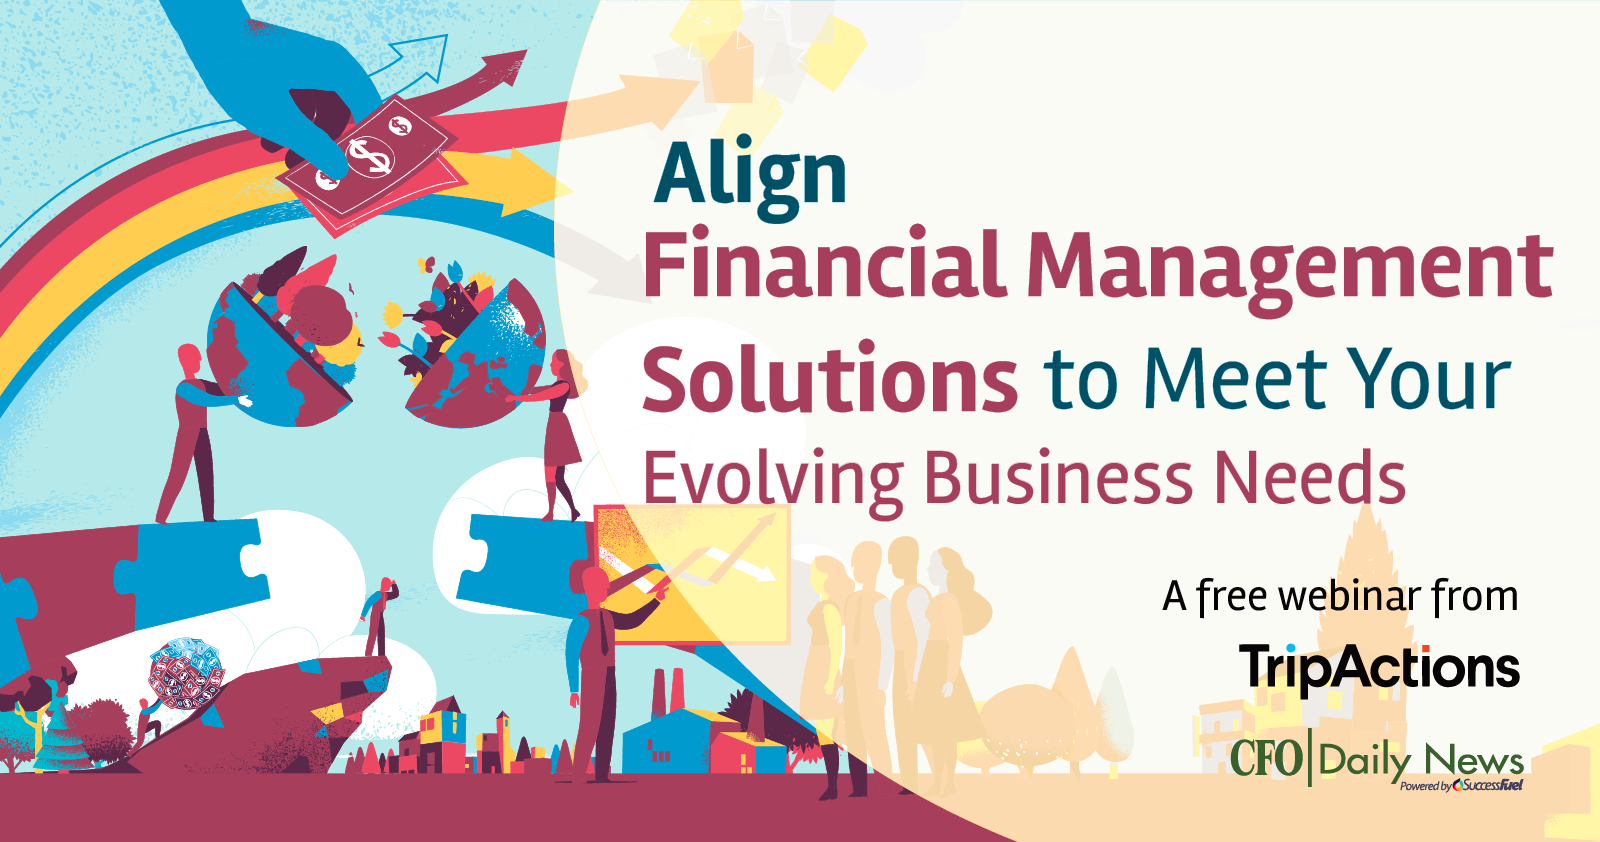 Align financial management solutions to meet your evolving business needs